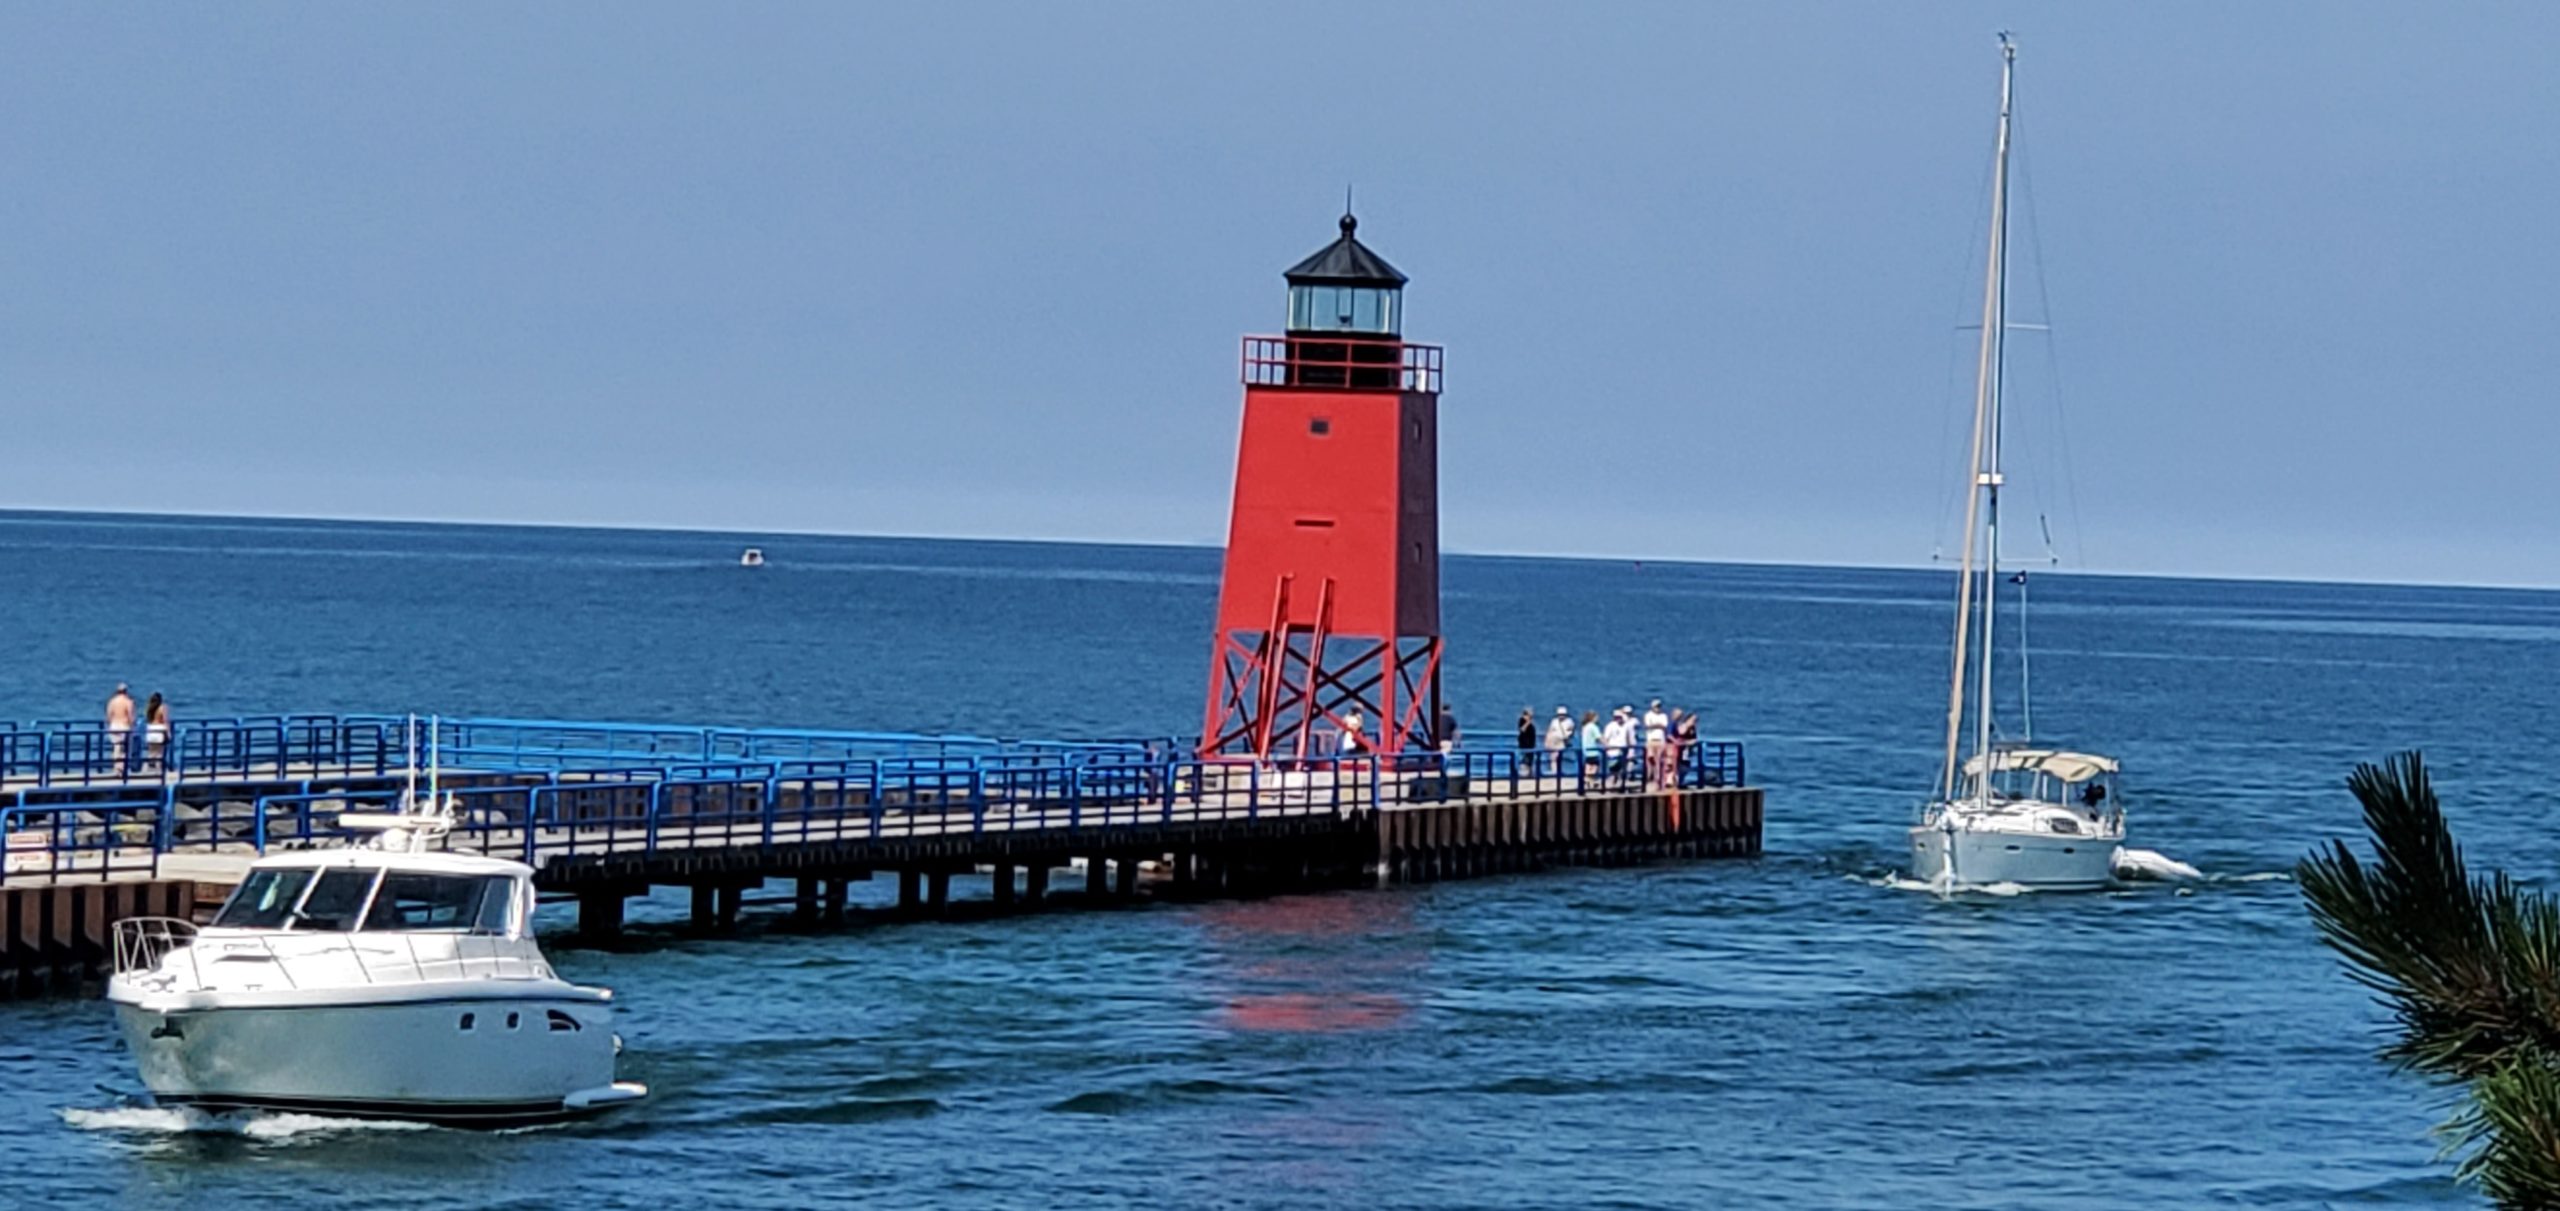 MICHIGAN LIGHTHOUSE SERIES - EXPLORE CHARLEVOIX'S LIGHTHOUSE